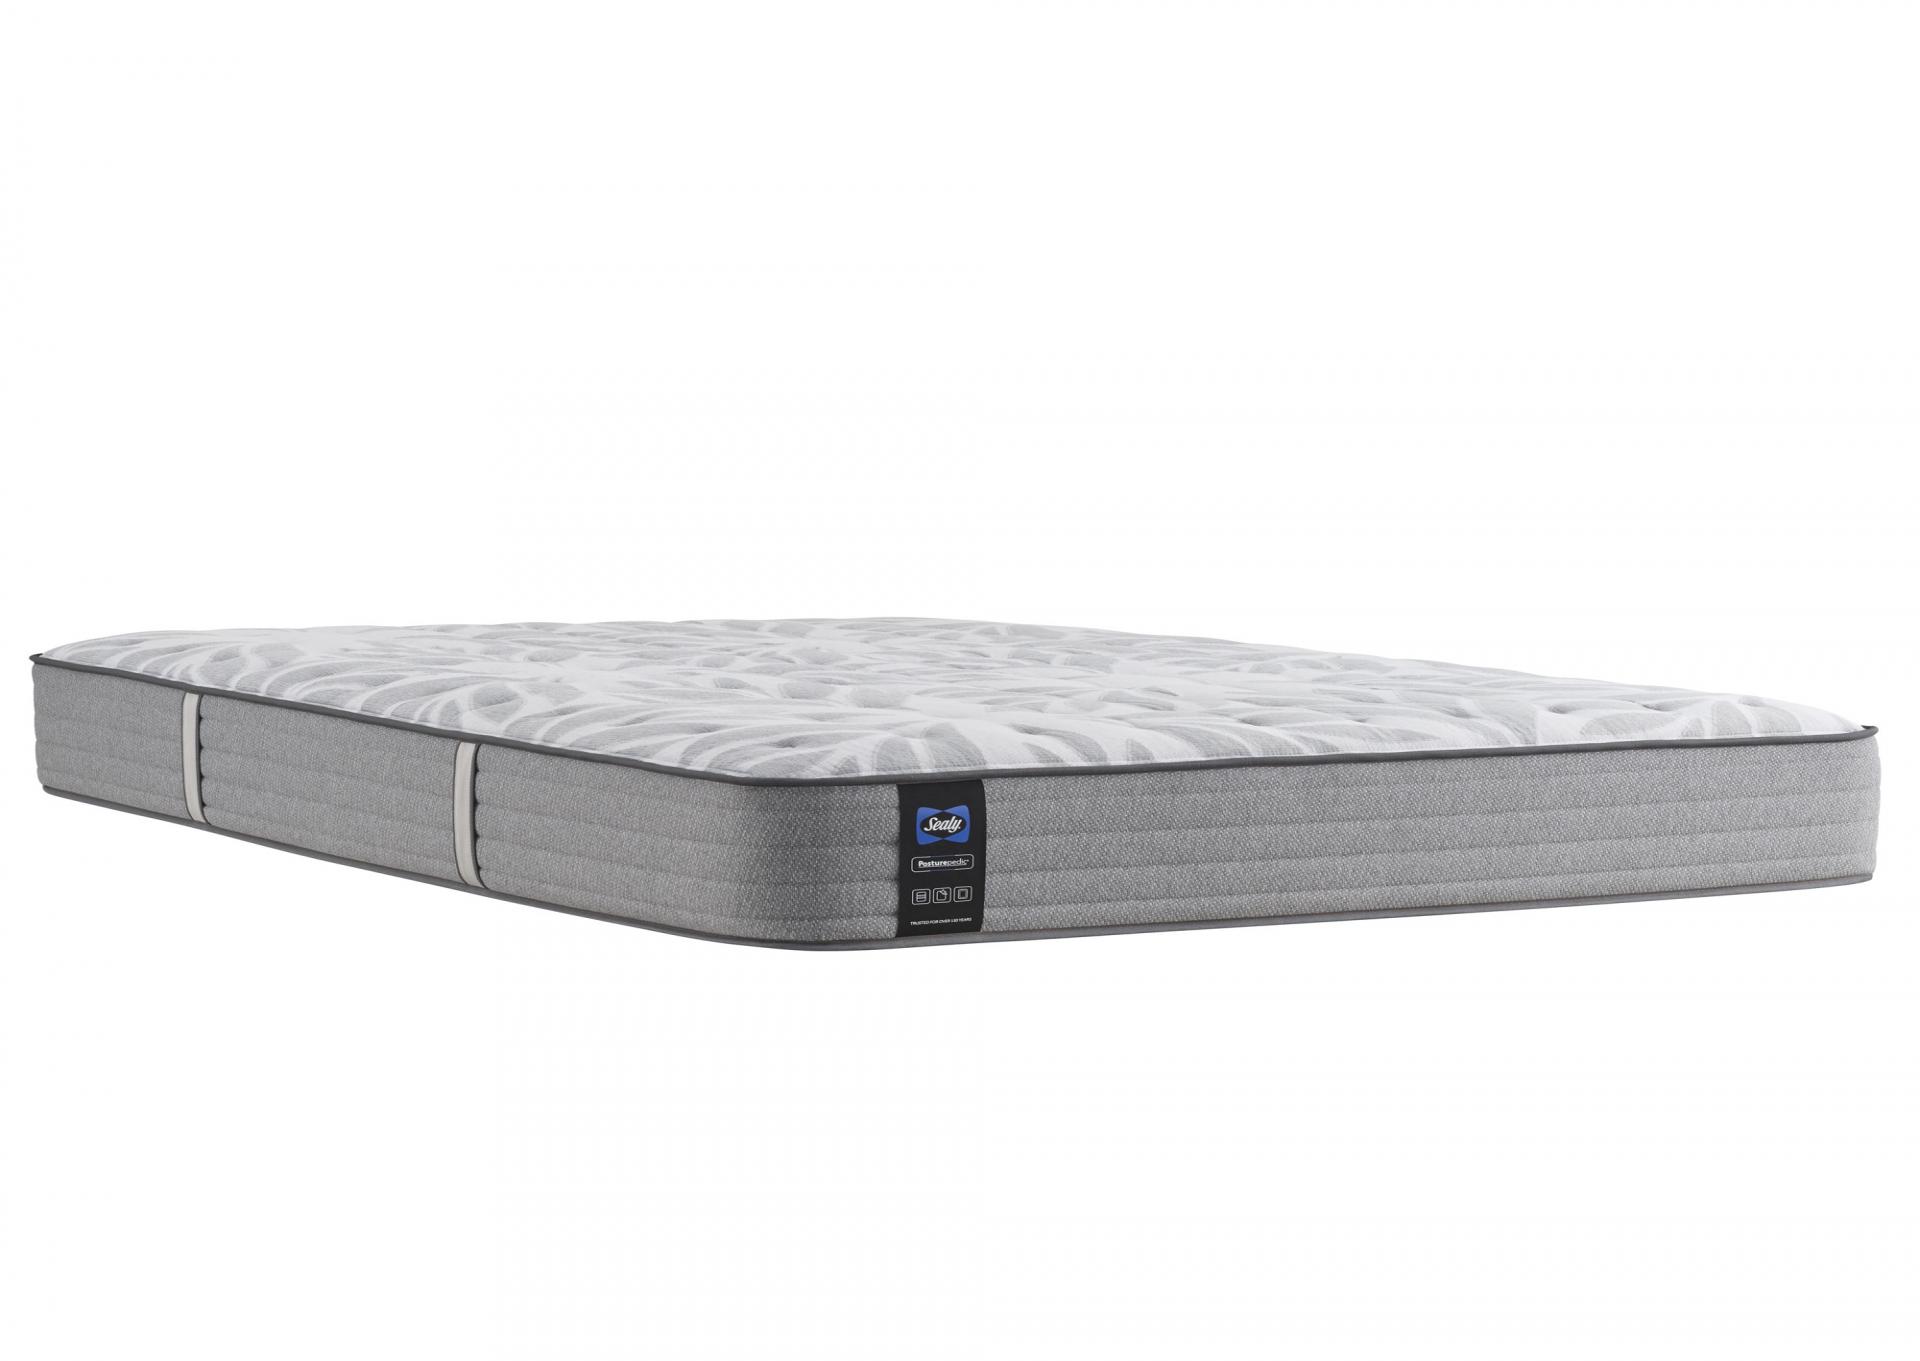 SILVER PINE FIRM TWIN MATTRESS,SEALY MATTRESS MANUFACTURING COMPANY